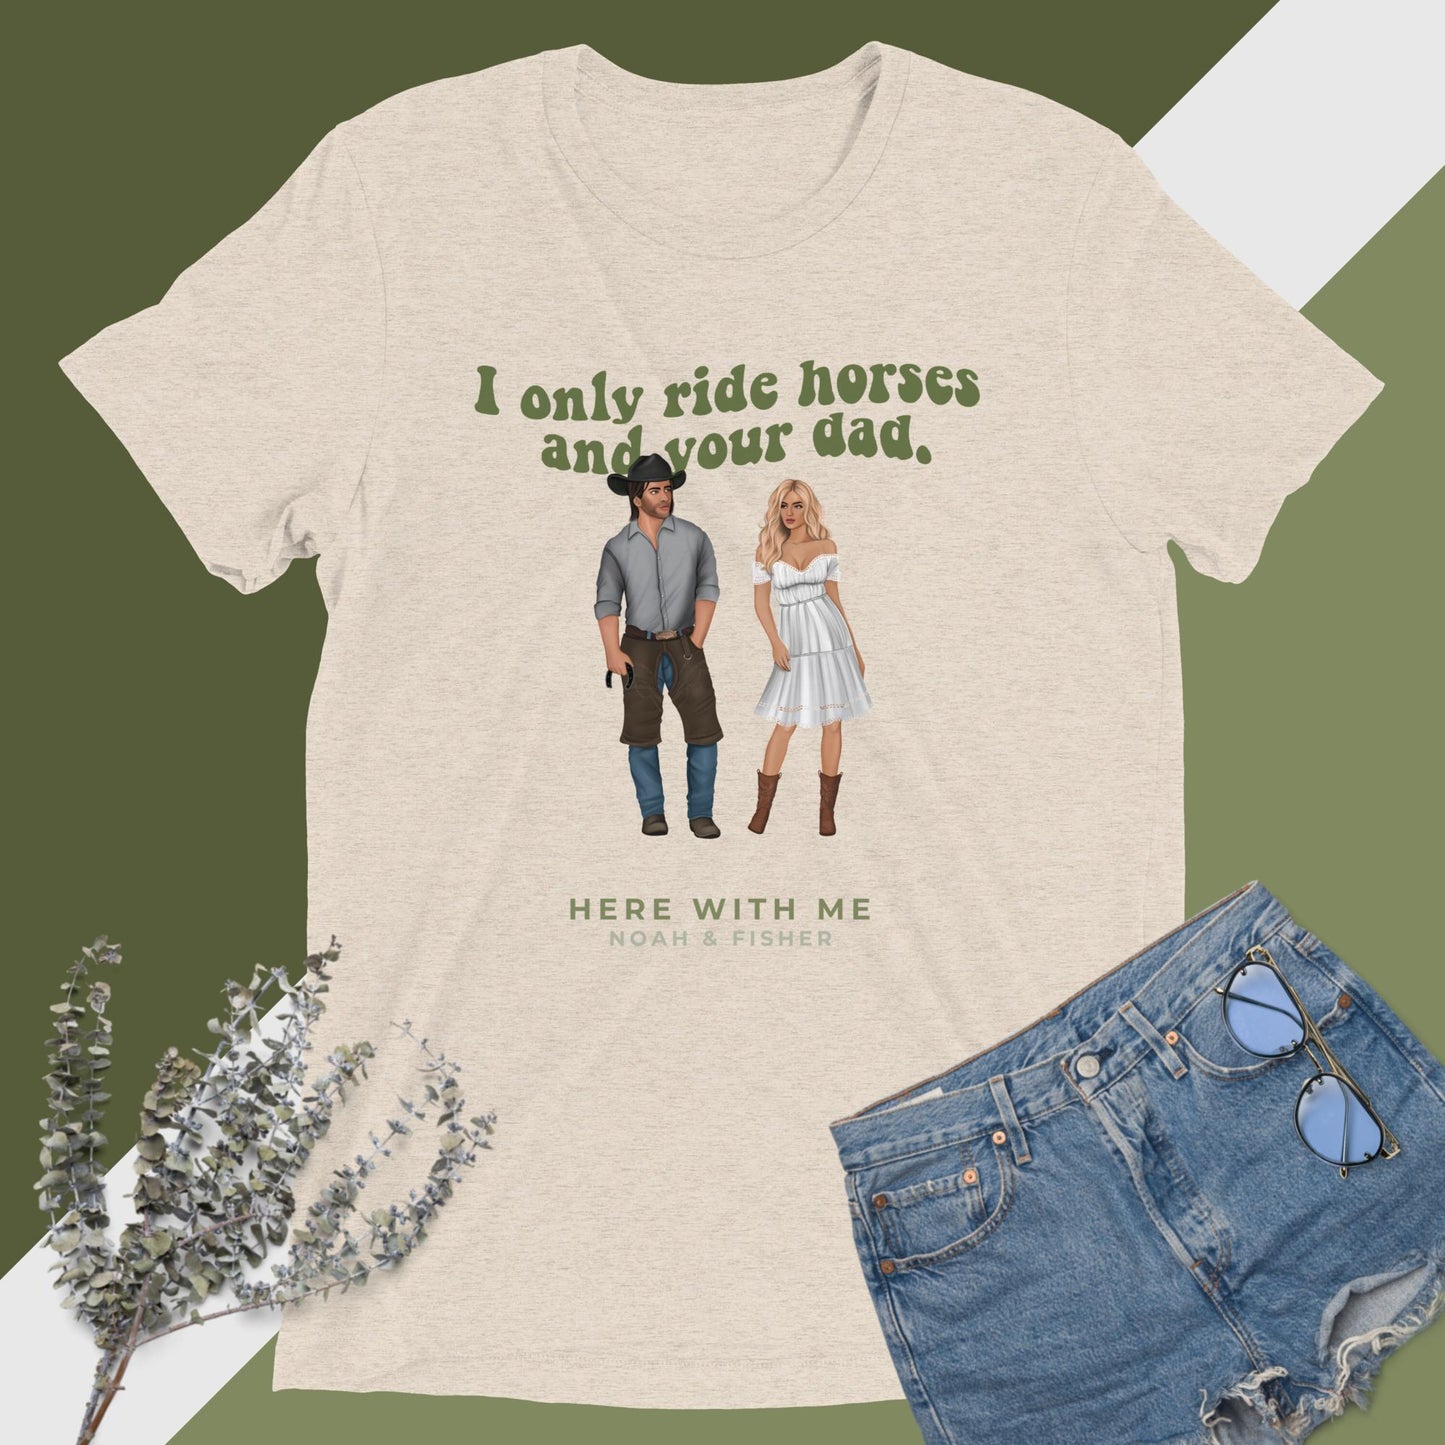 "I Only Ride Horses and Your Dad" [Here With Me] Unisex Triblend Short Sleeve T-shirt